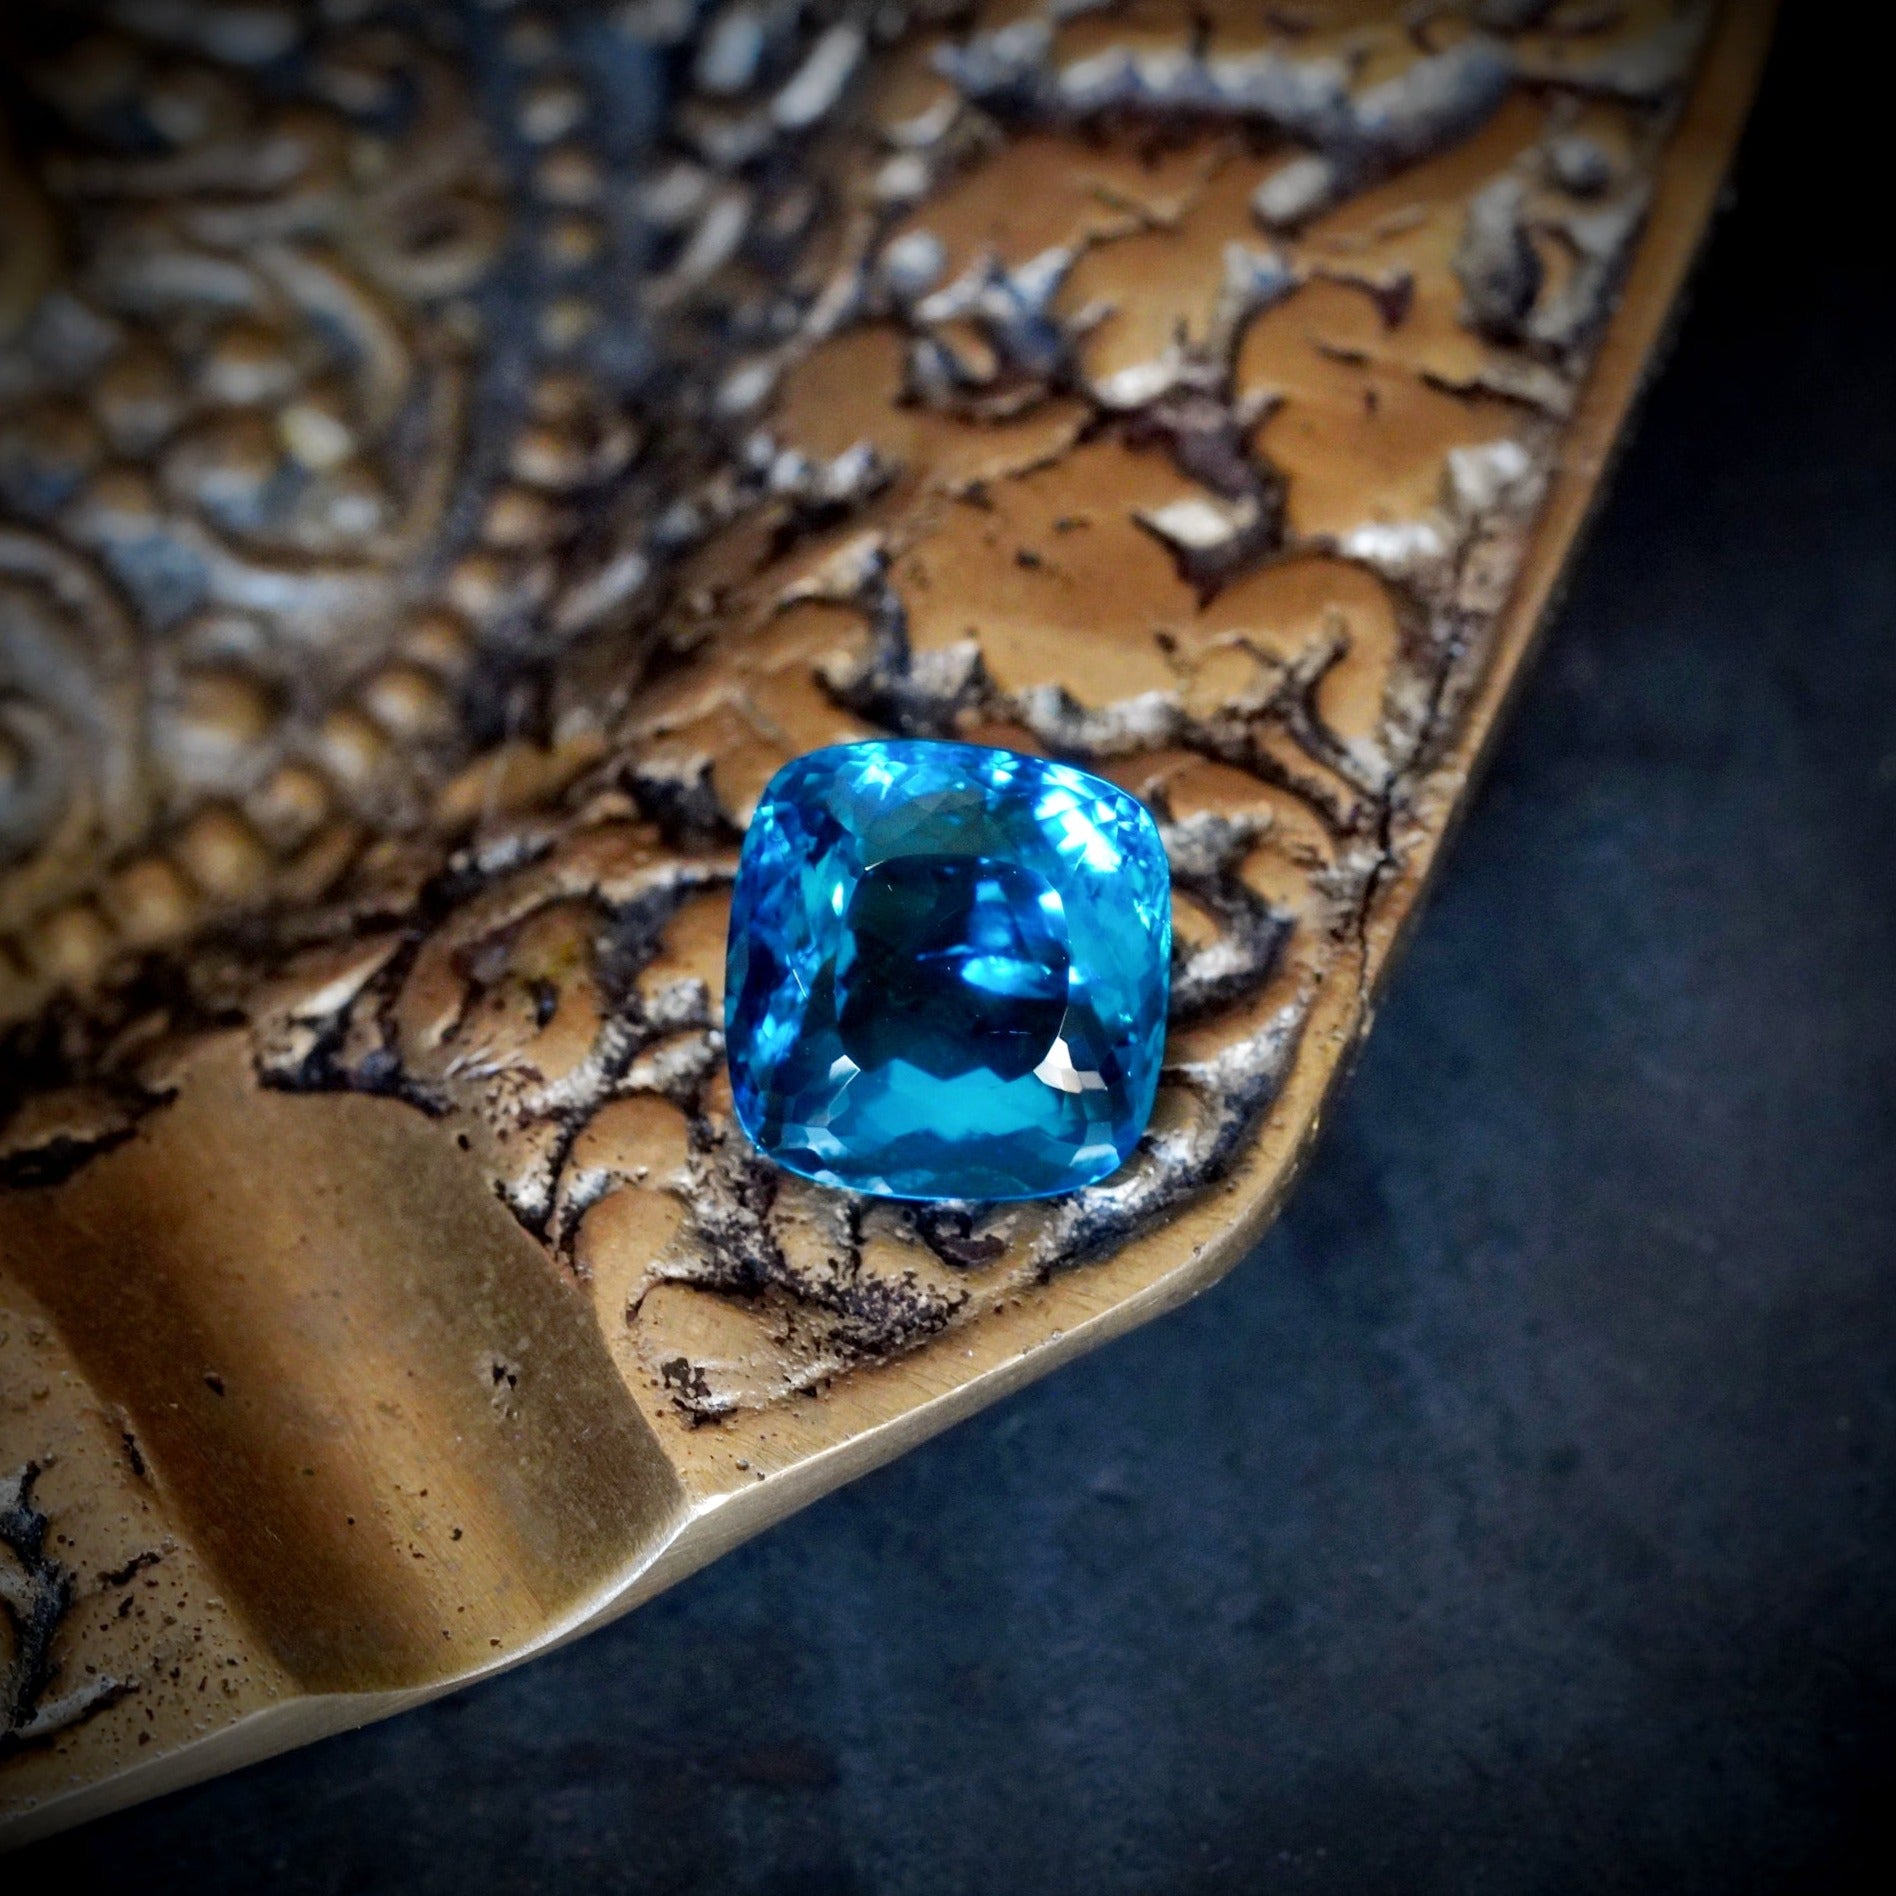 Tranquil Lagoon Hues: The Rarity and Unique Color of the 8.89 CT Cushion No Heat Brazilian Paraiba